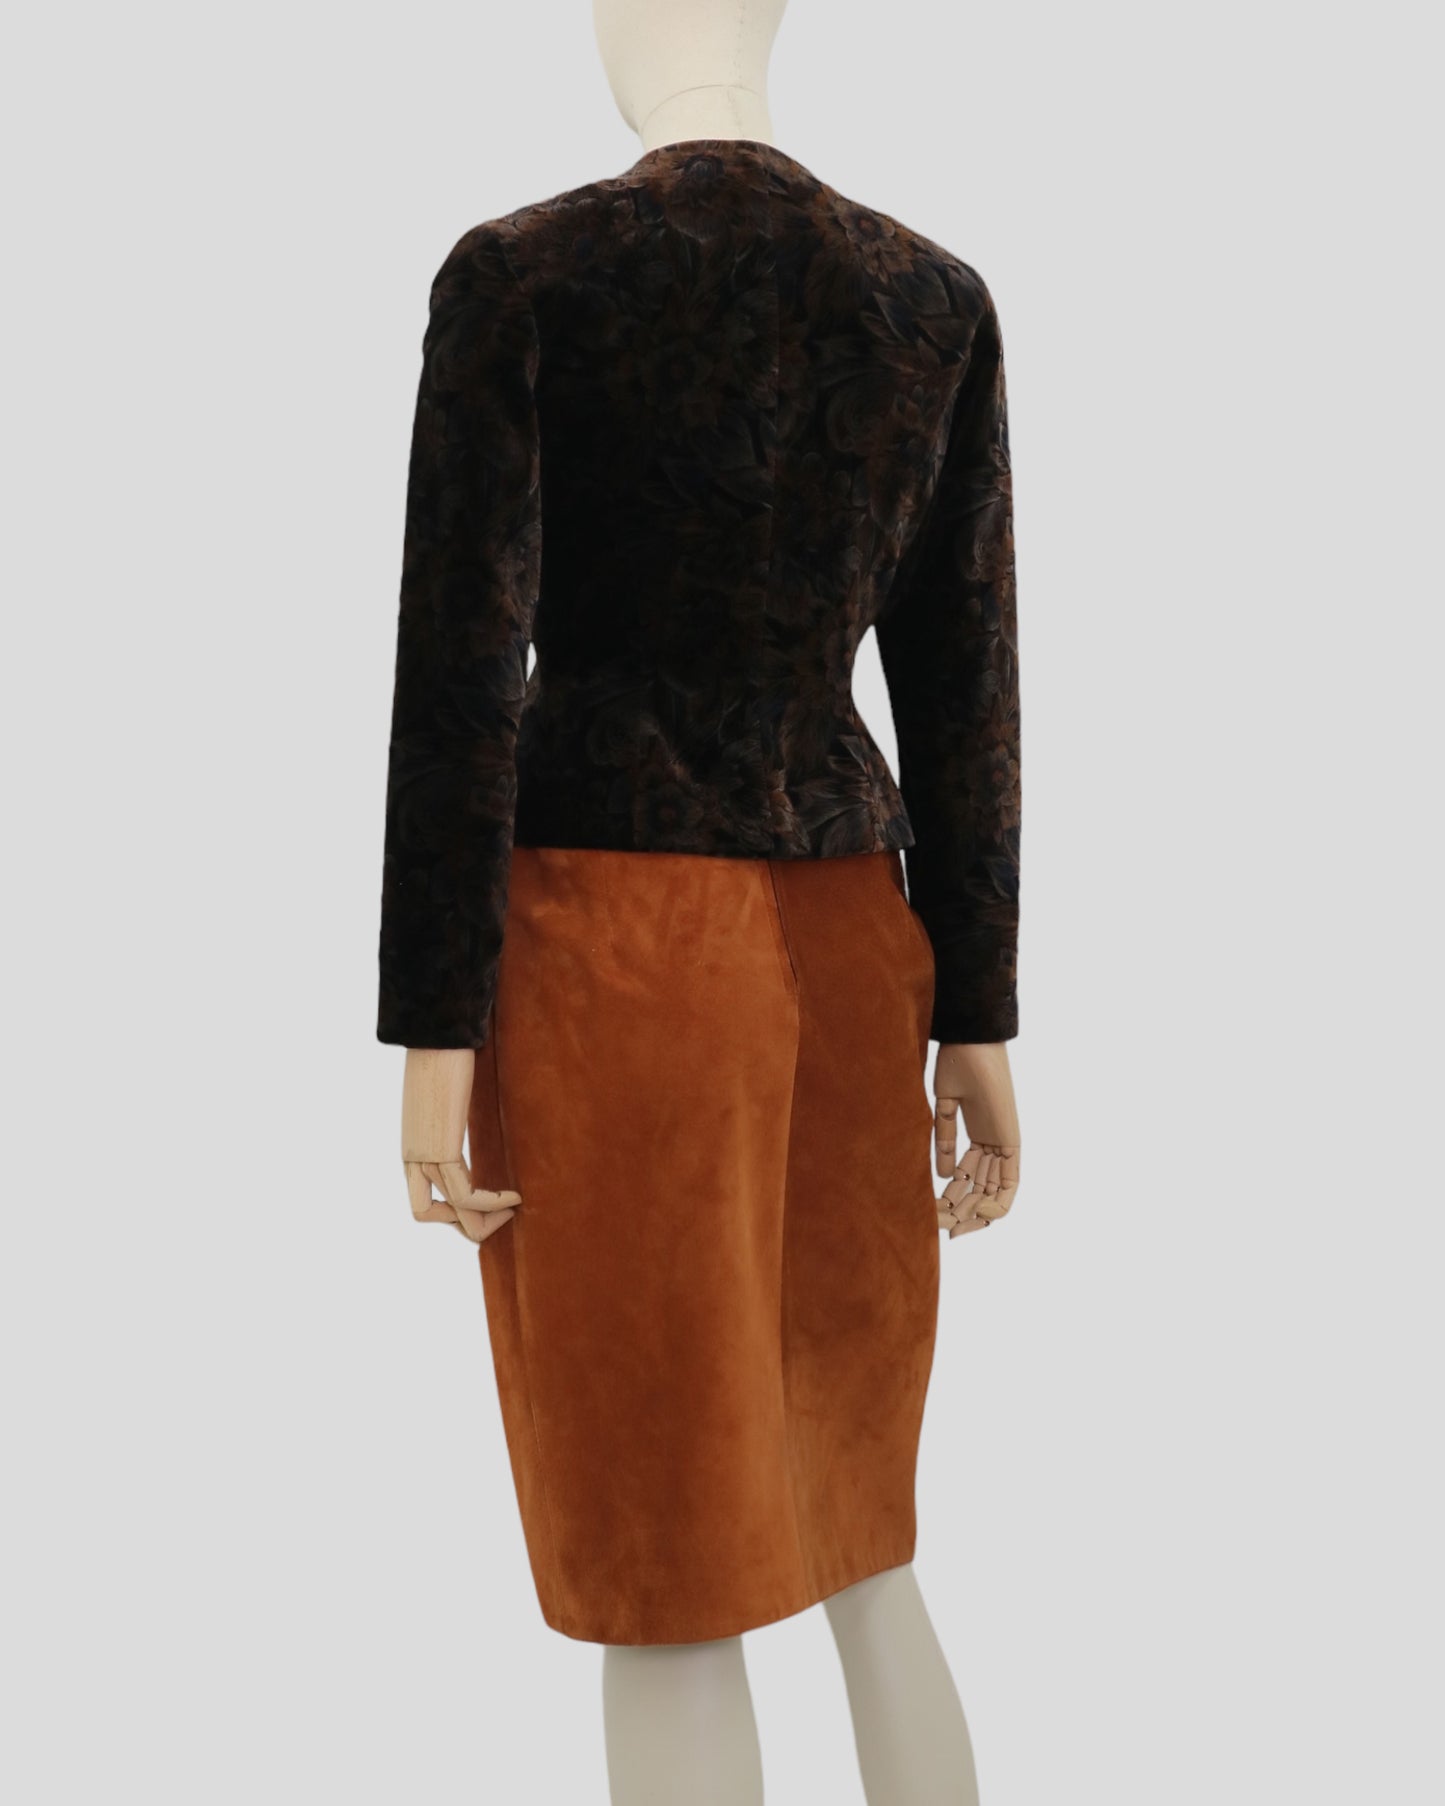 80’s Wrap Suede Skirt